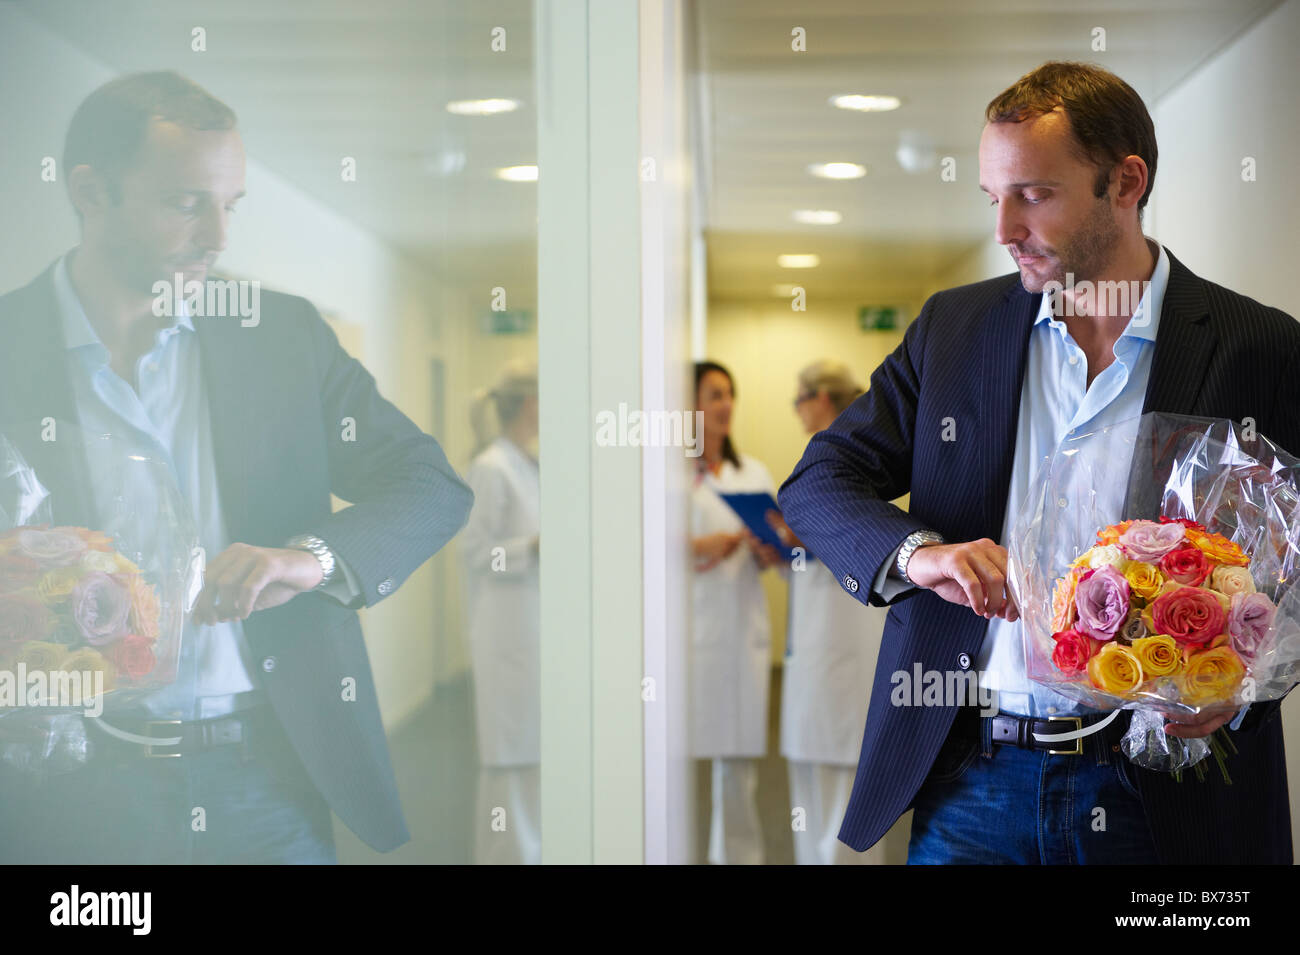 Man with flowers, looking at his watch Stock Photo